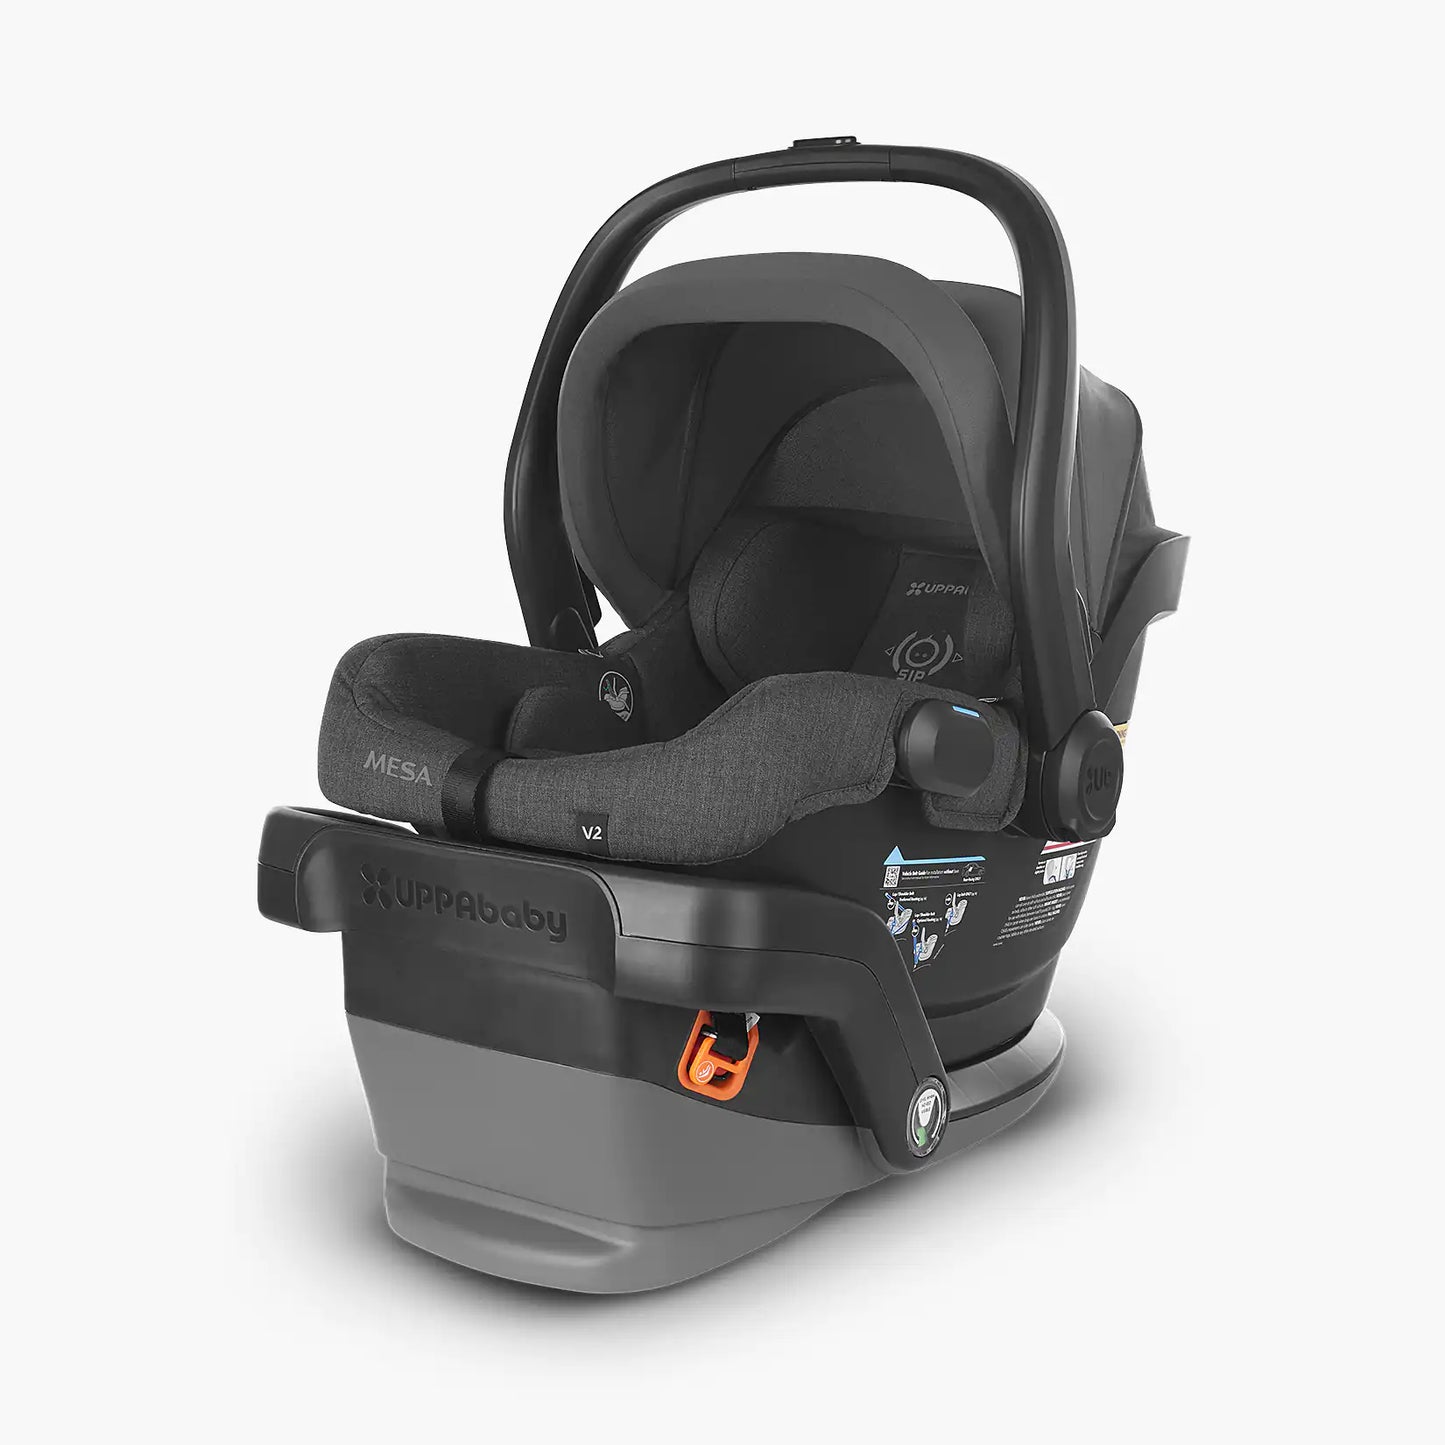 MESA V2 - Infant Car Seat - GREYSON  - DROPSHIP ITEM - PLEASE ALLOW ONE WEEK FOR PROCESSING